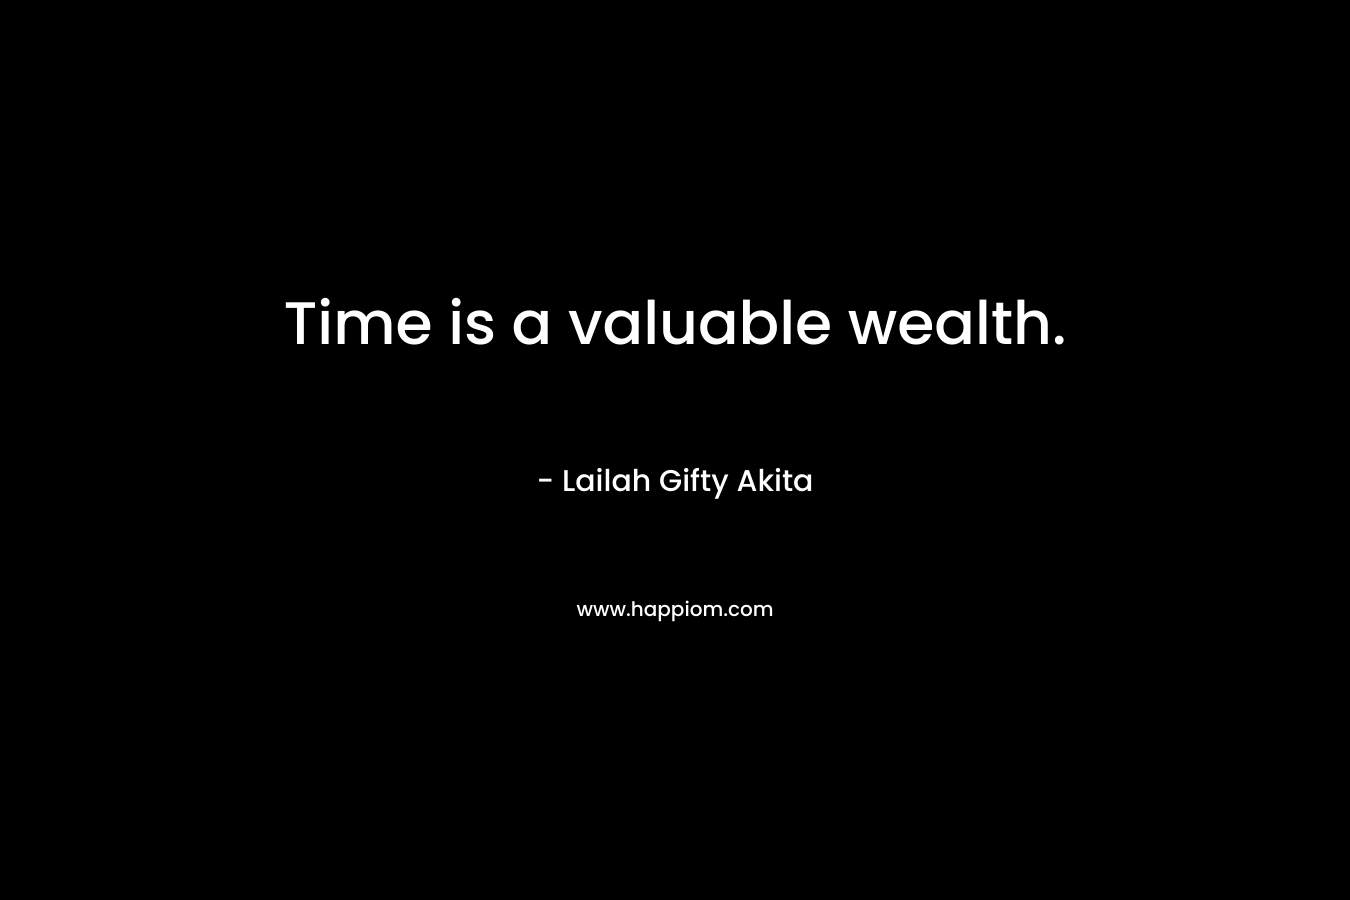 Time is a valuable wealth.